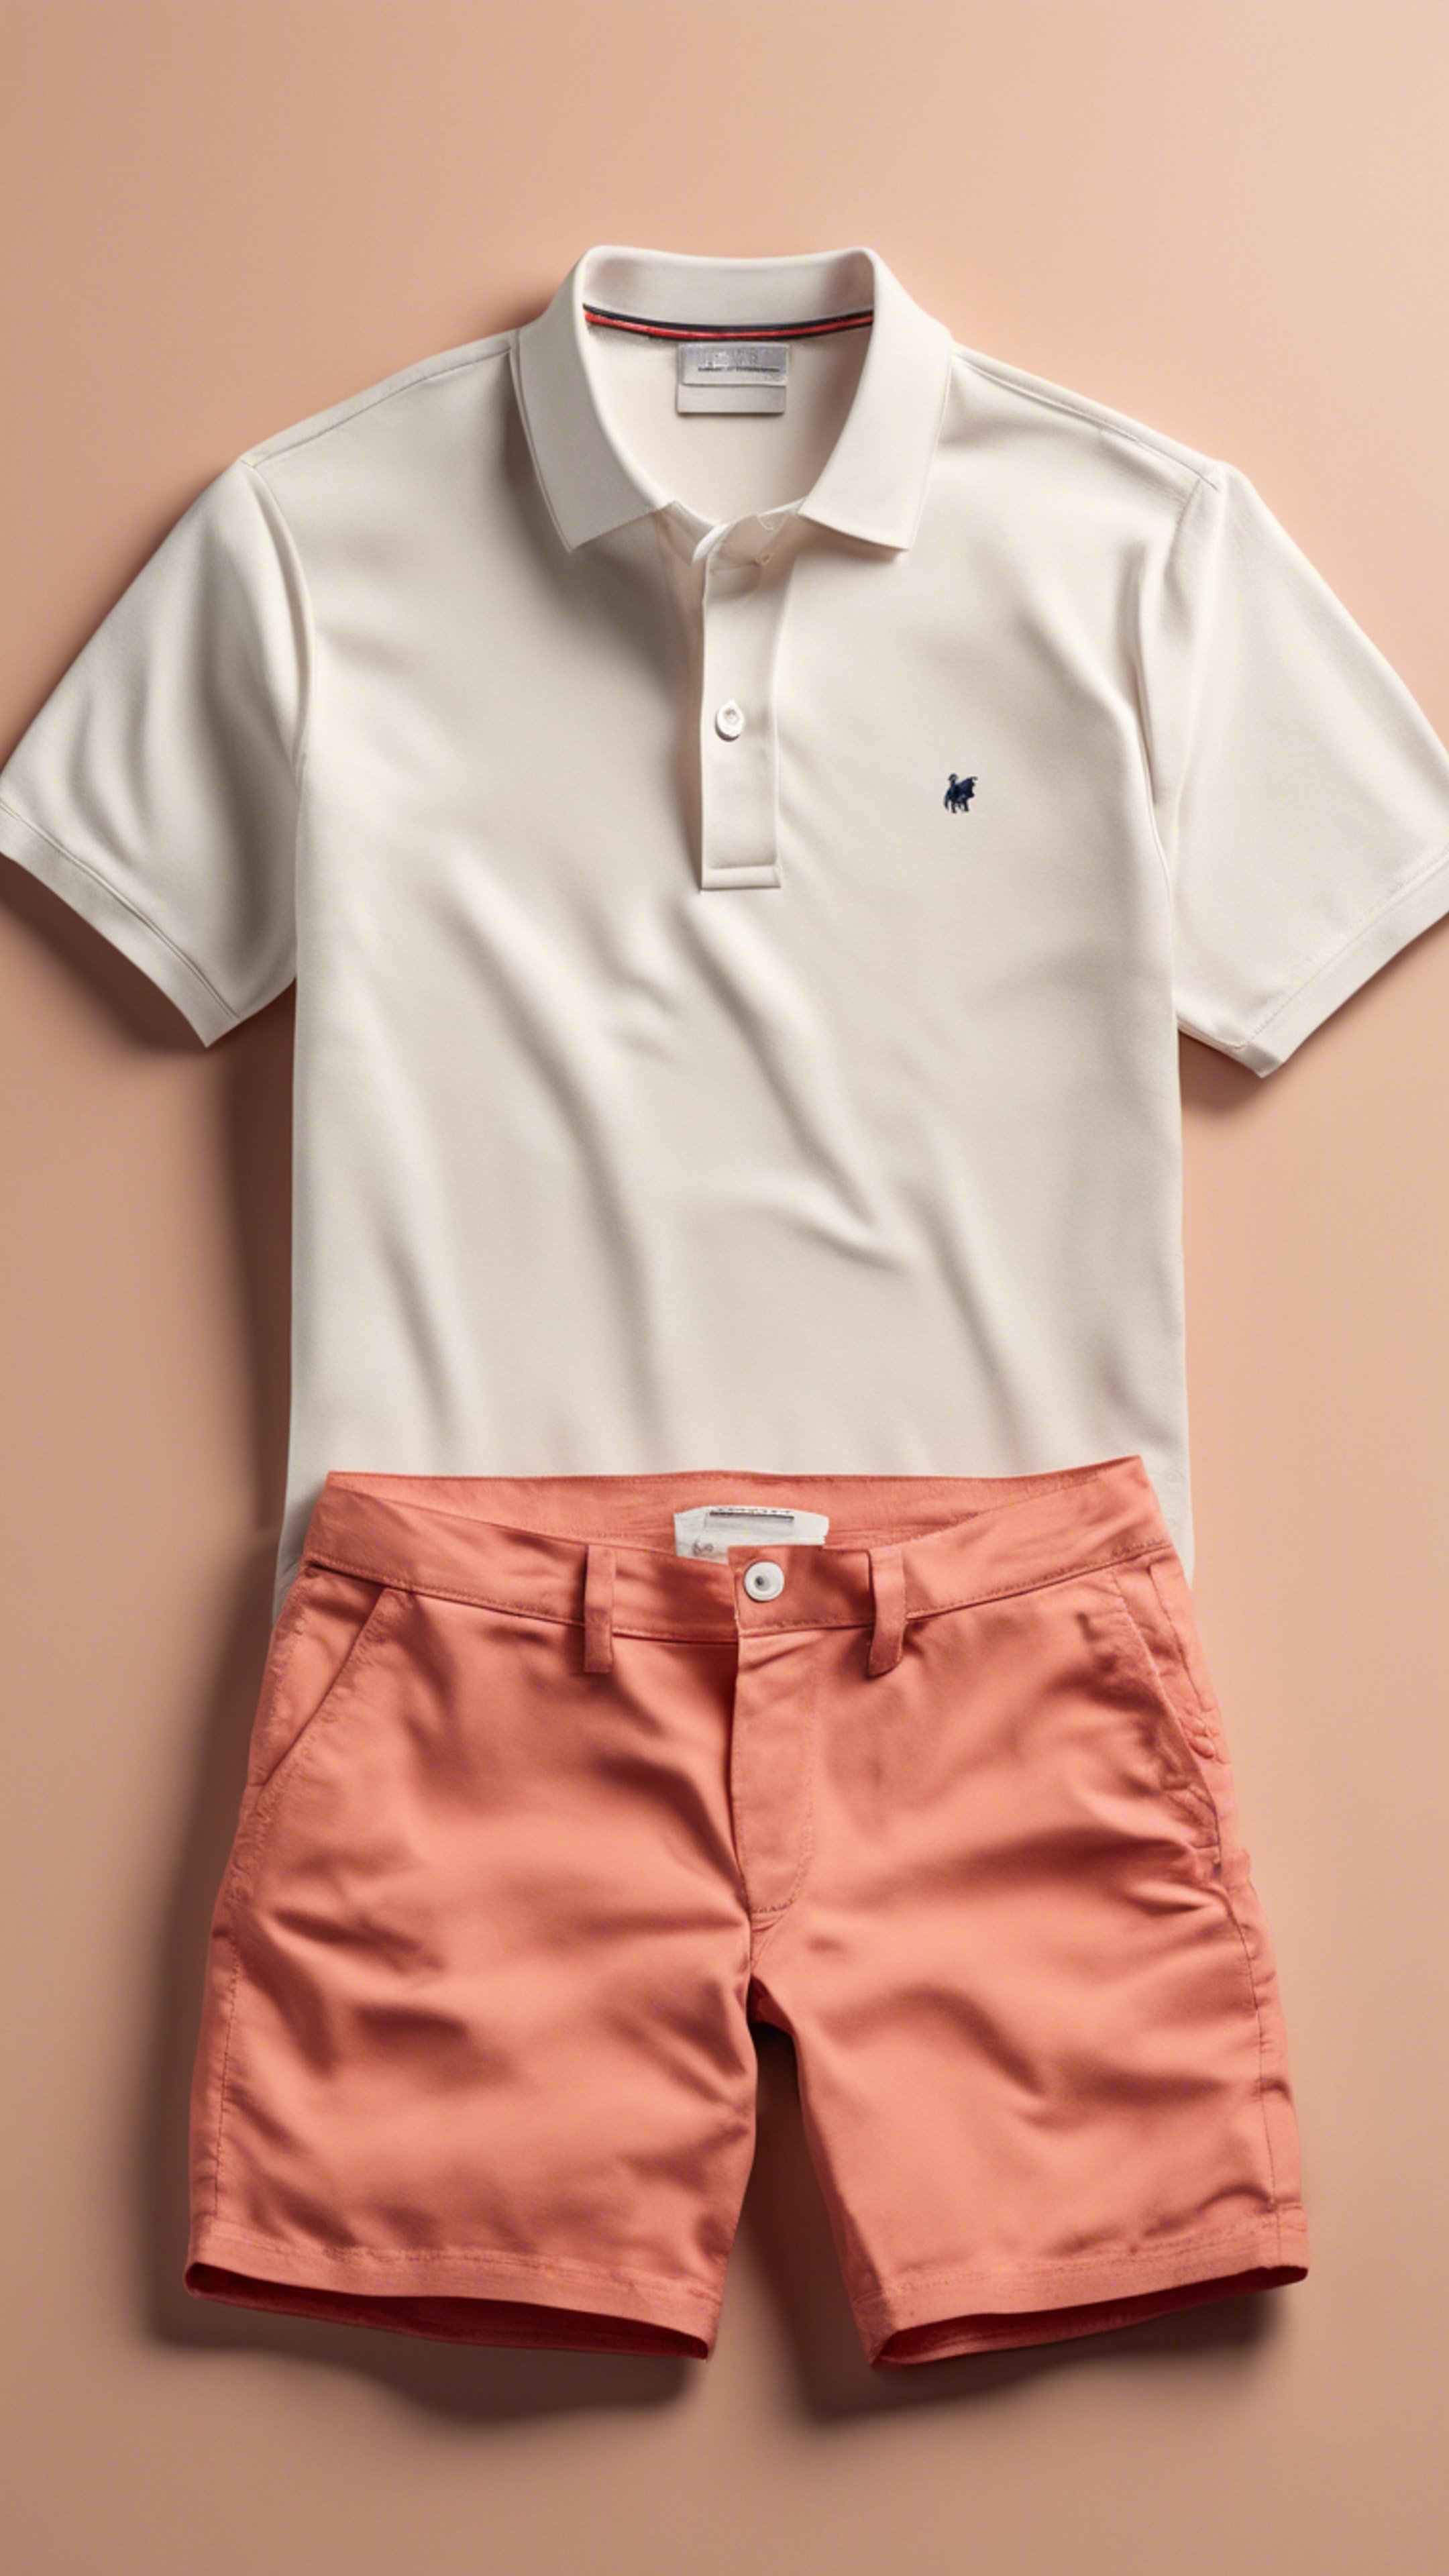 A classic white polo shirt paired with coral colored chino shorts, laid flat on a cream-colored backdrop.壁紙[bdd338d5072a4a13a2d3]